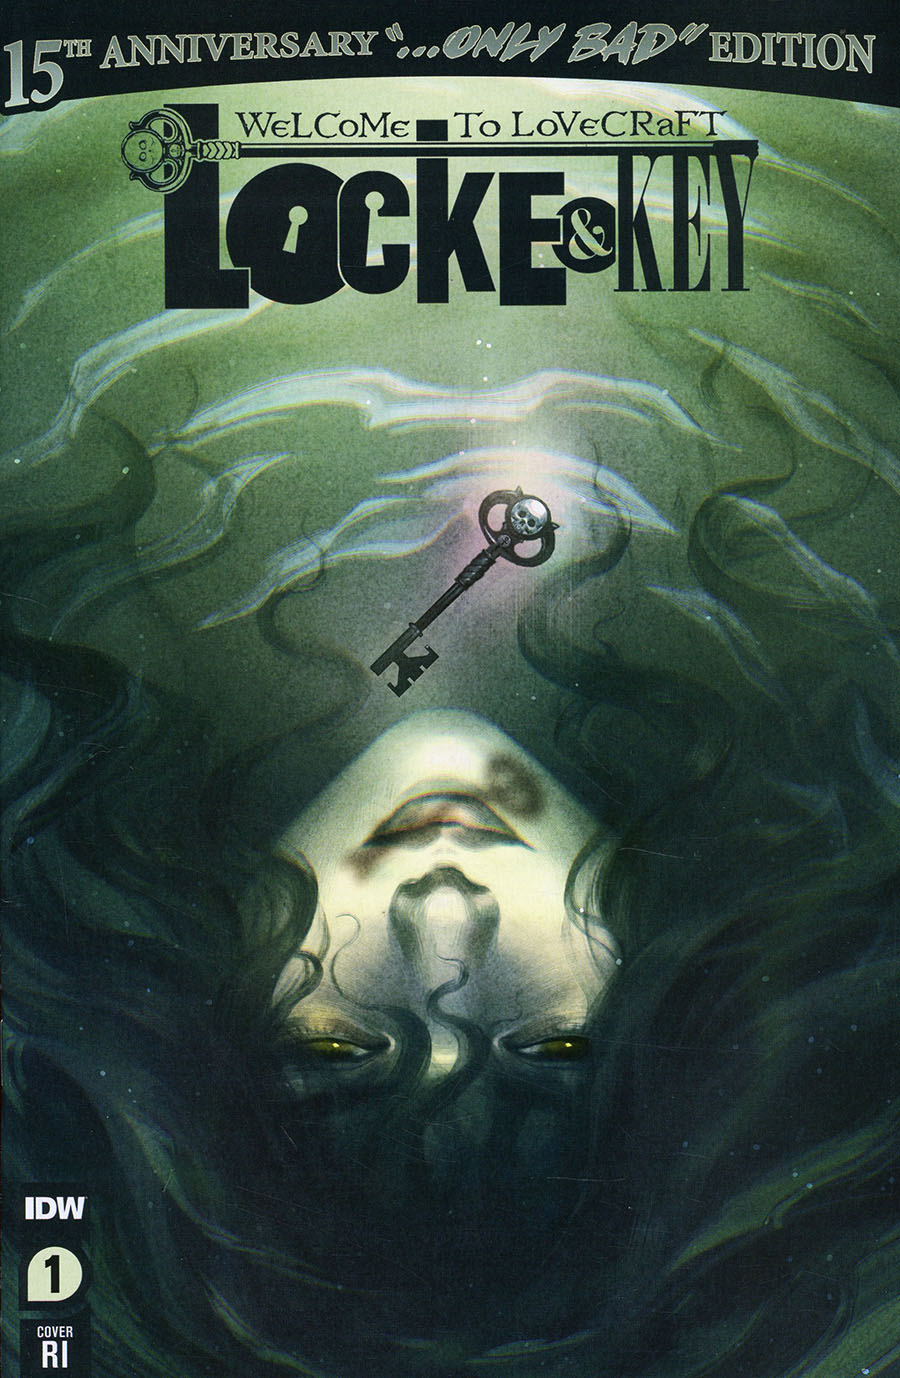 Locke & Key Welcome To Lovecraft Anniversary Edition #1 (One Shot) Cover F Incentive Reiko Murakami Variant Cover